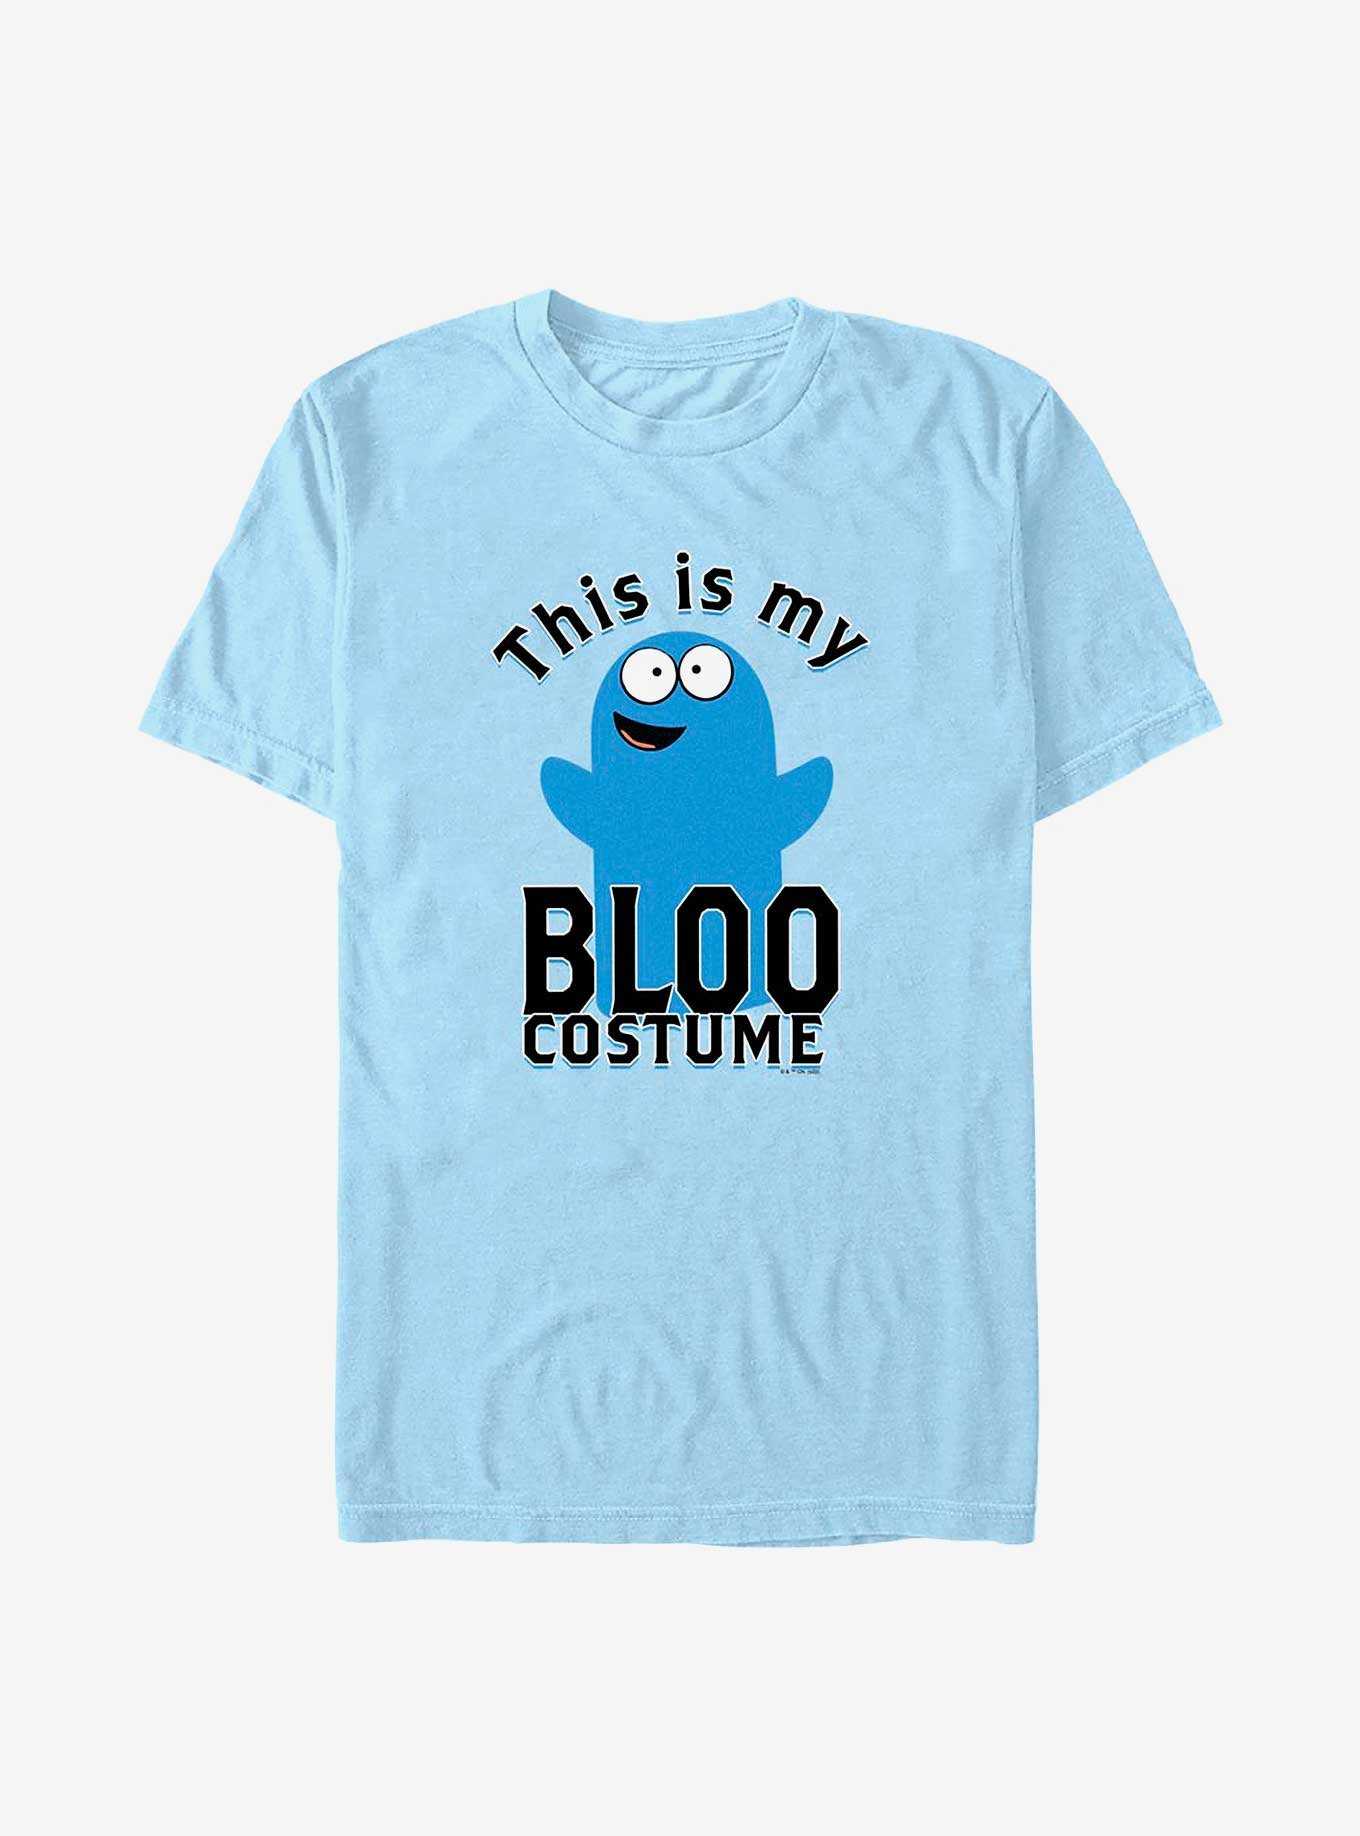 Cartoon Network Foster's Home for Imaginary Friends My Bloo Costume T-Shirt, , hi-res